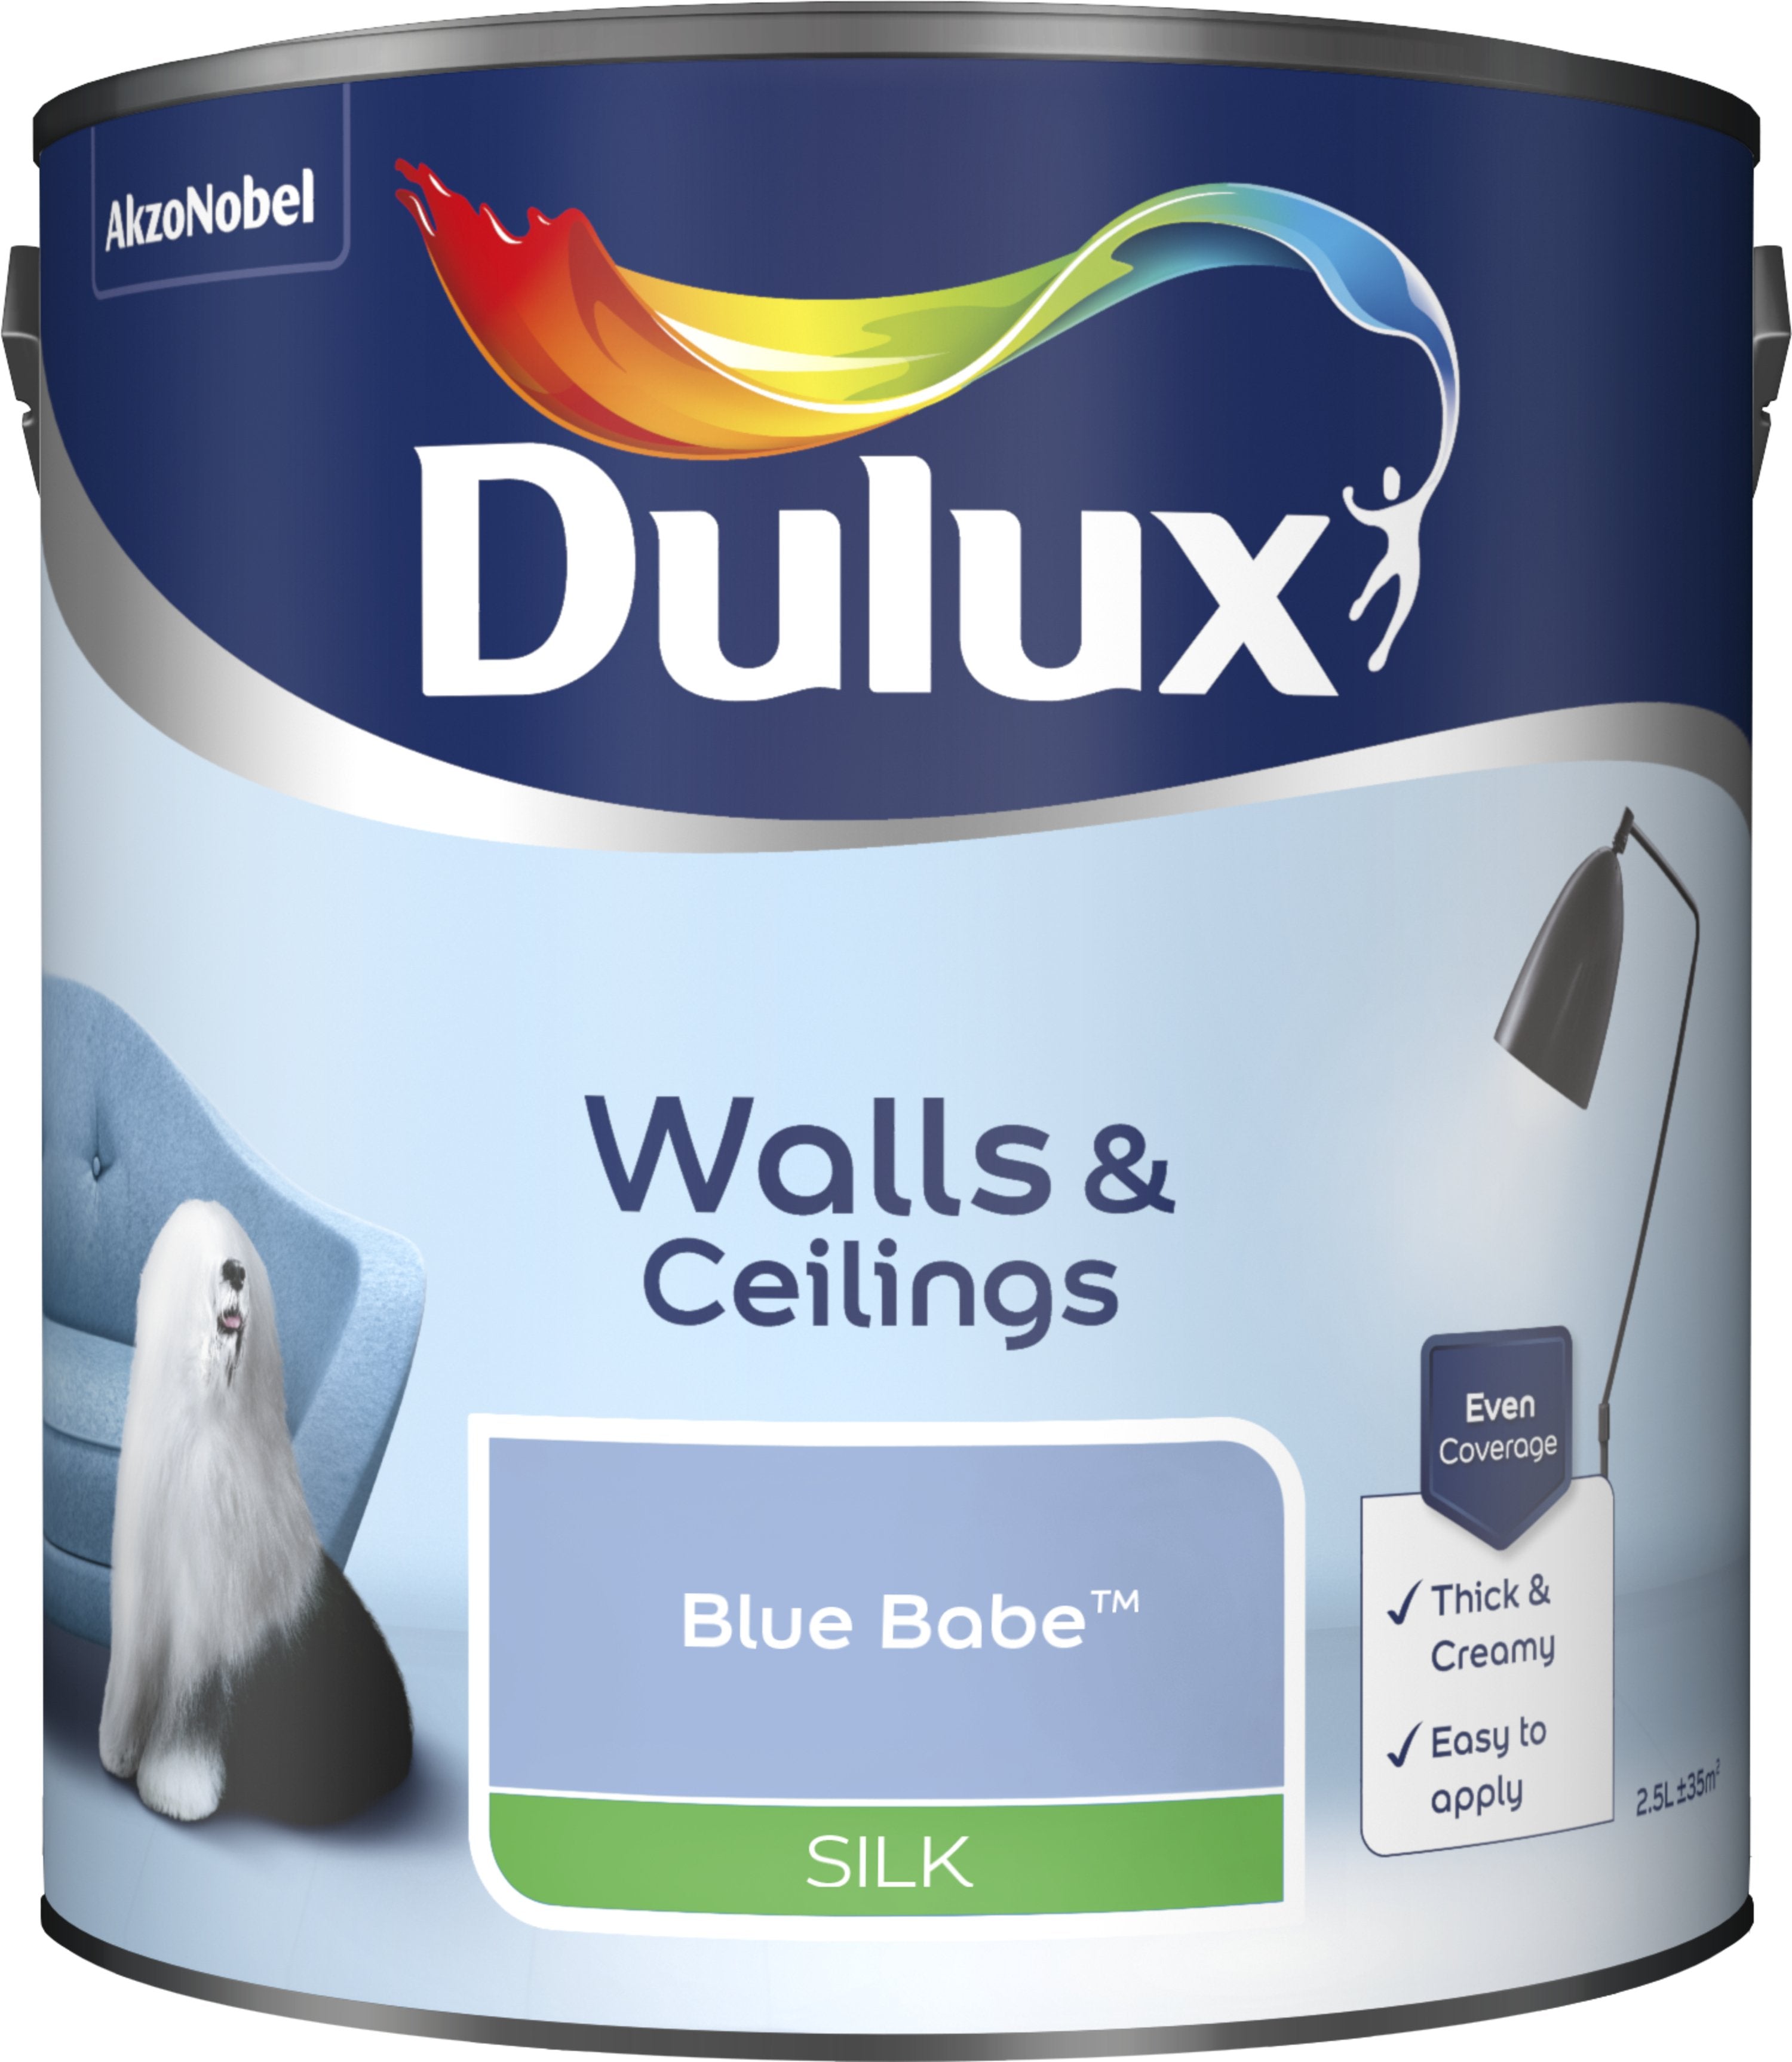 Dulux Silk Emulsion Paint For Walls And Ceilings - Blue Babe 2.5L Garden & Diy  Home Improvements  